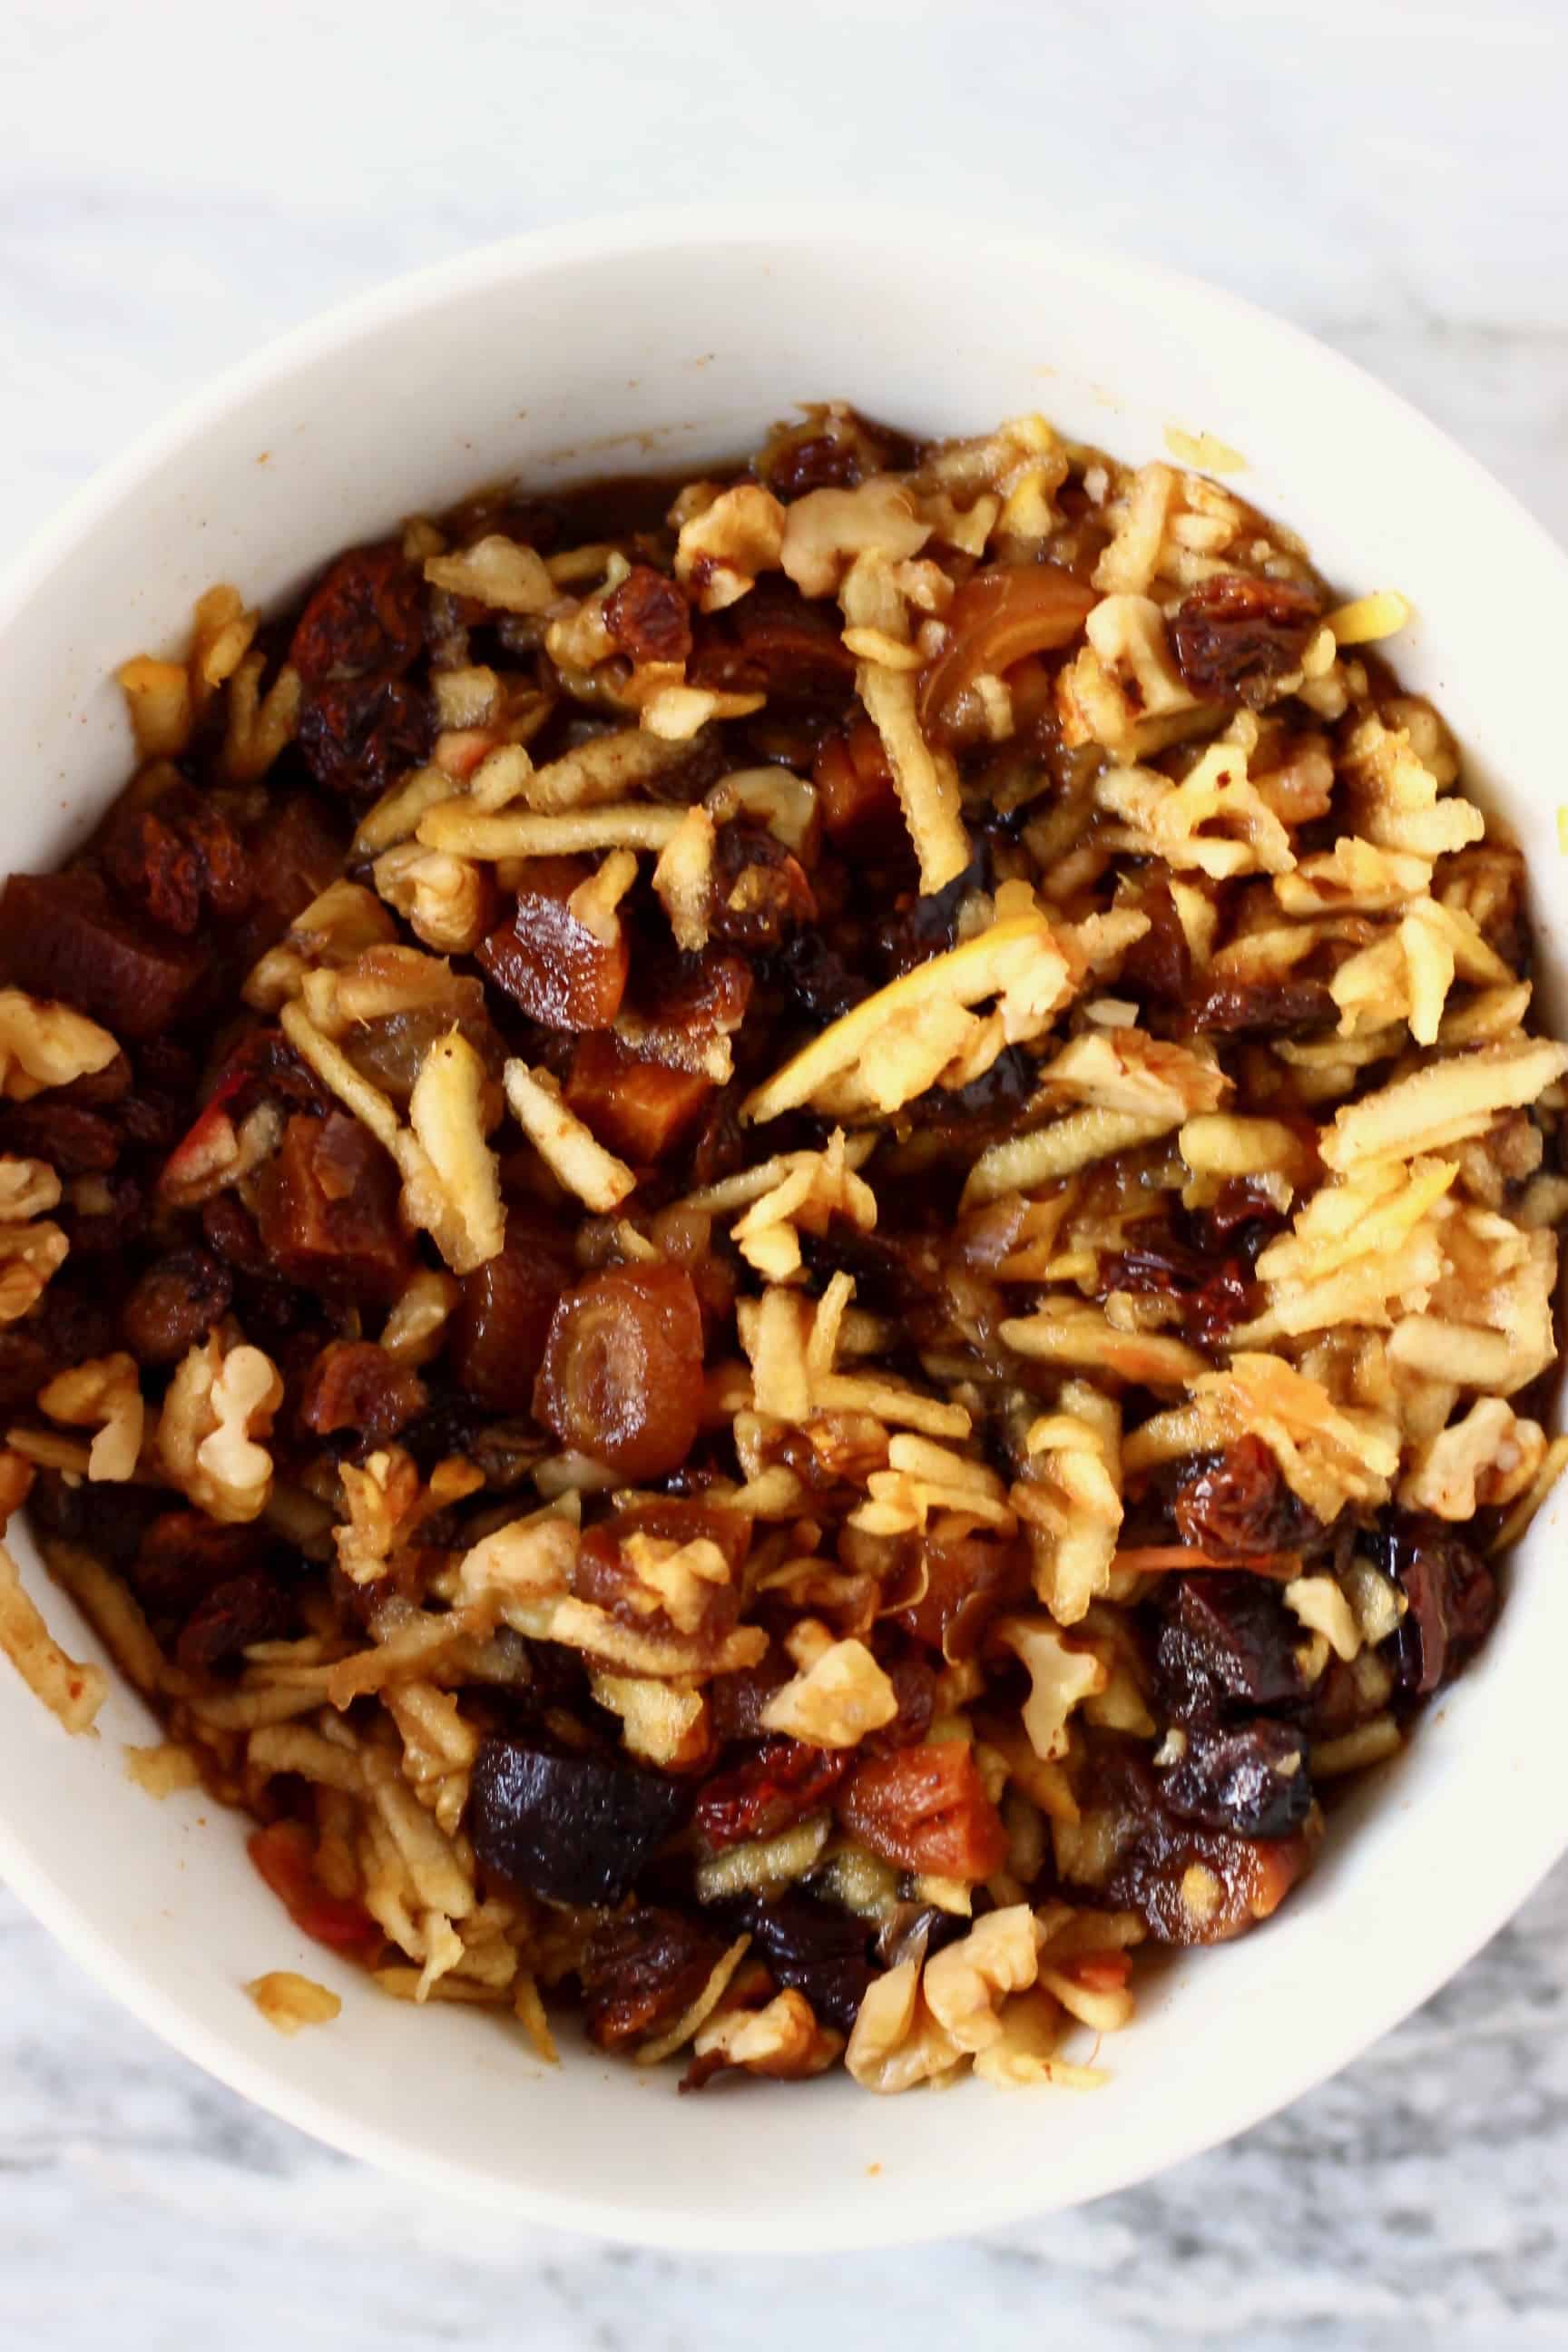 Chopped dried fruits and and grated apple soaked in sherry in a bowl to make vegan mincemeat 